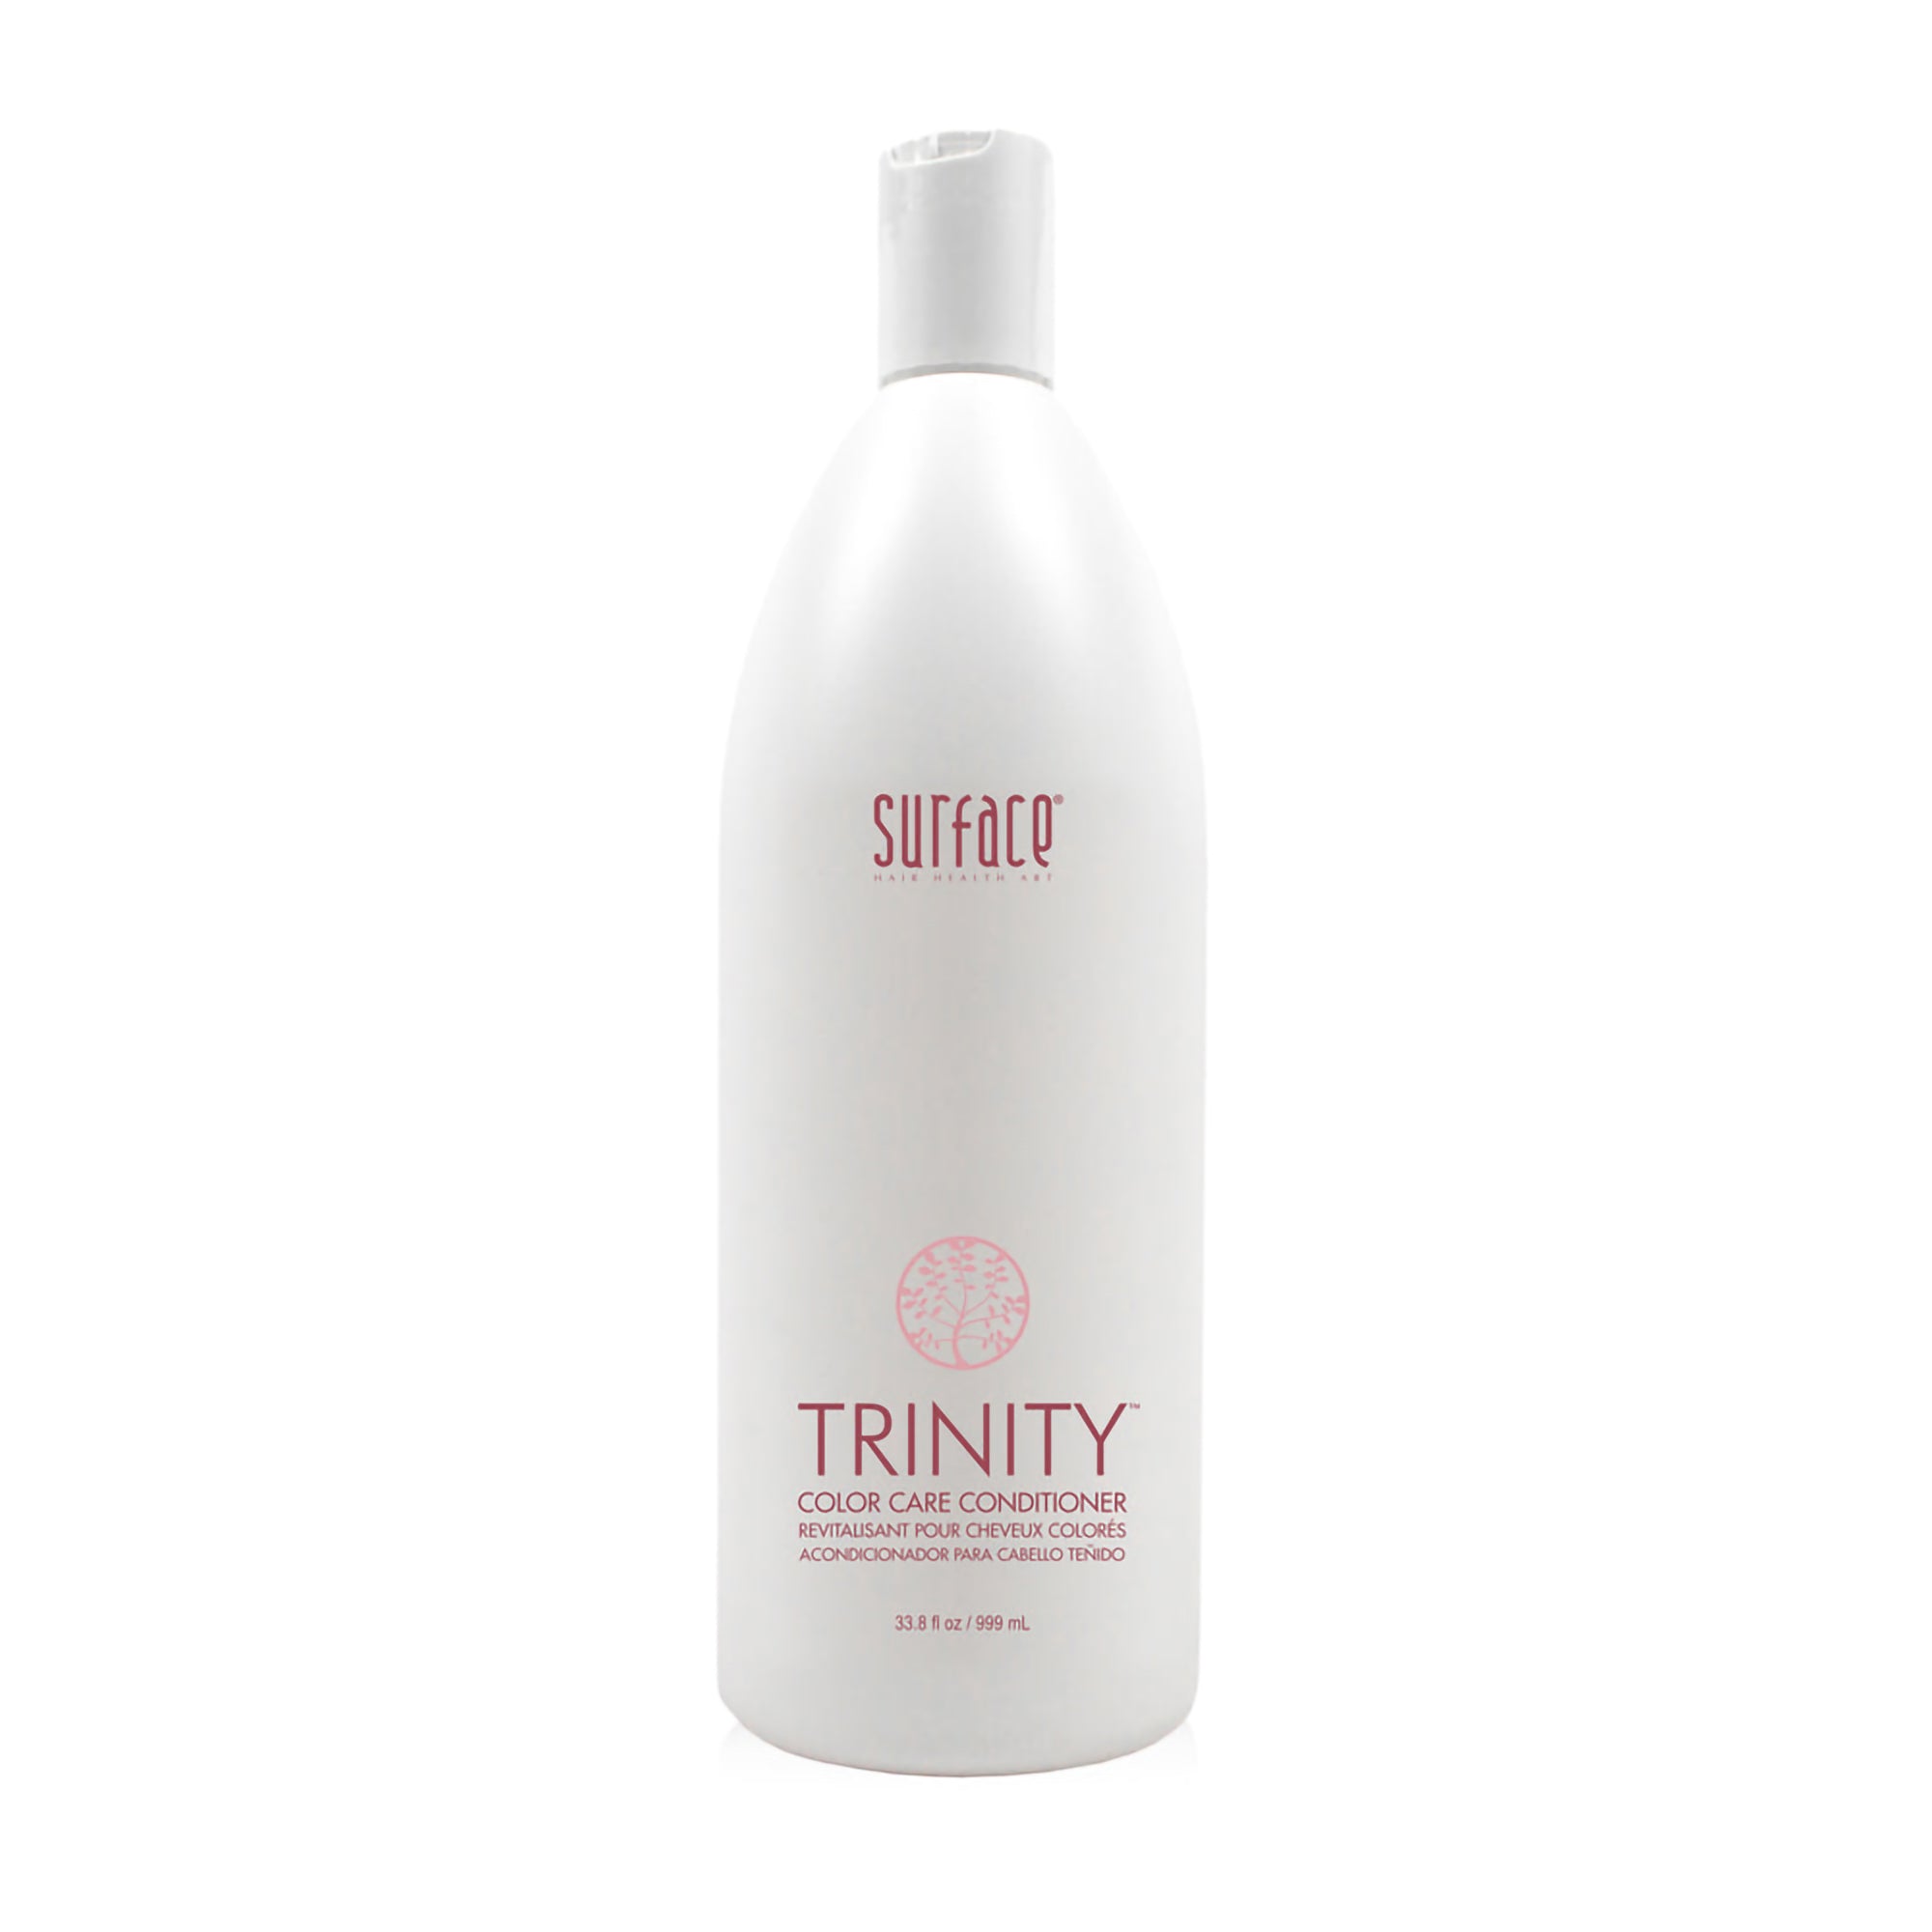 Surface Trinity Shampoo and Conditioner Liter Duo / LITER